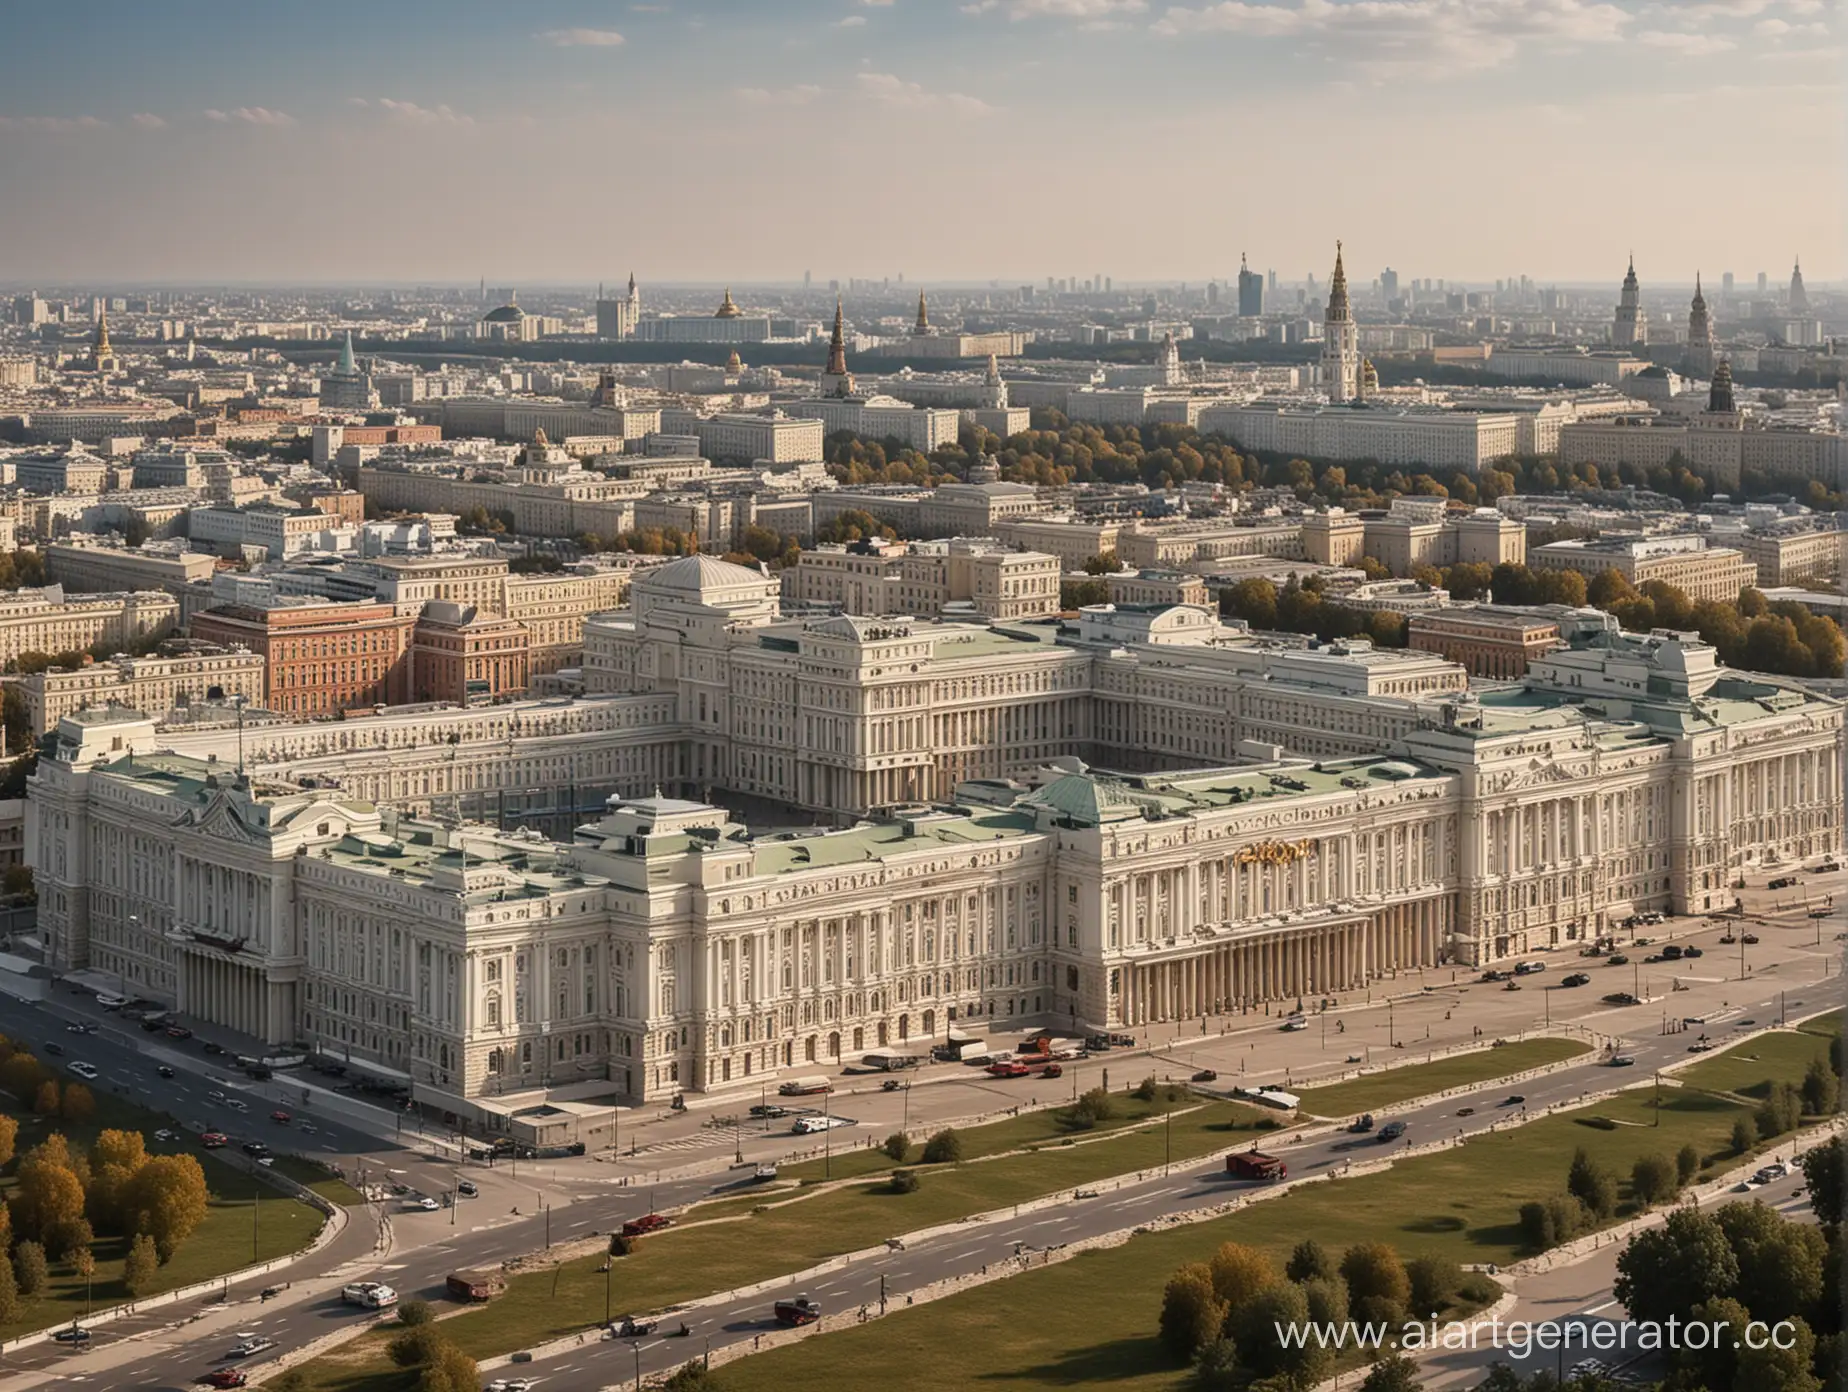 Moscow-Reimagined-Roman-Empire-Influence-in-Urban-Architecture